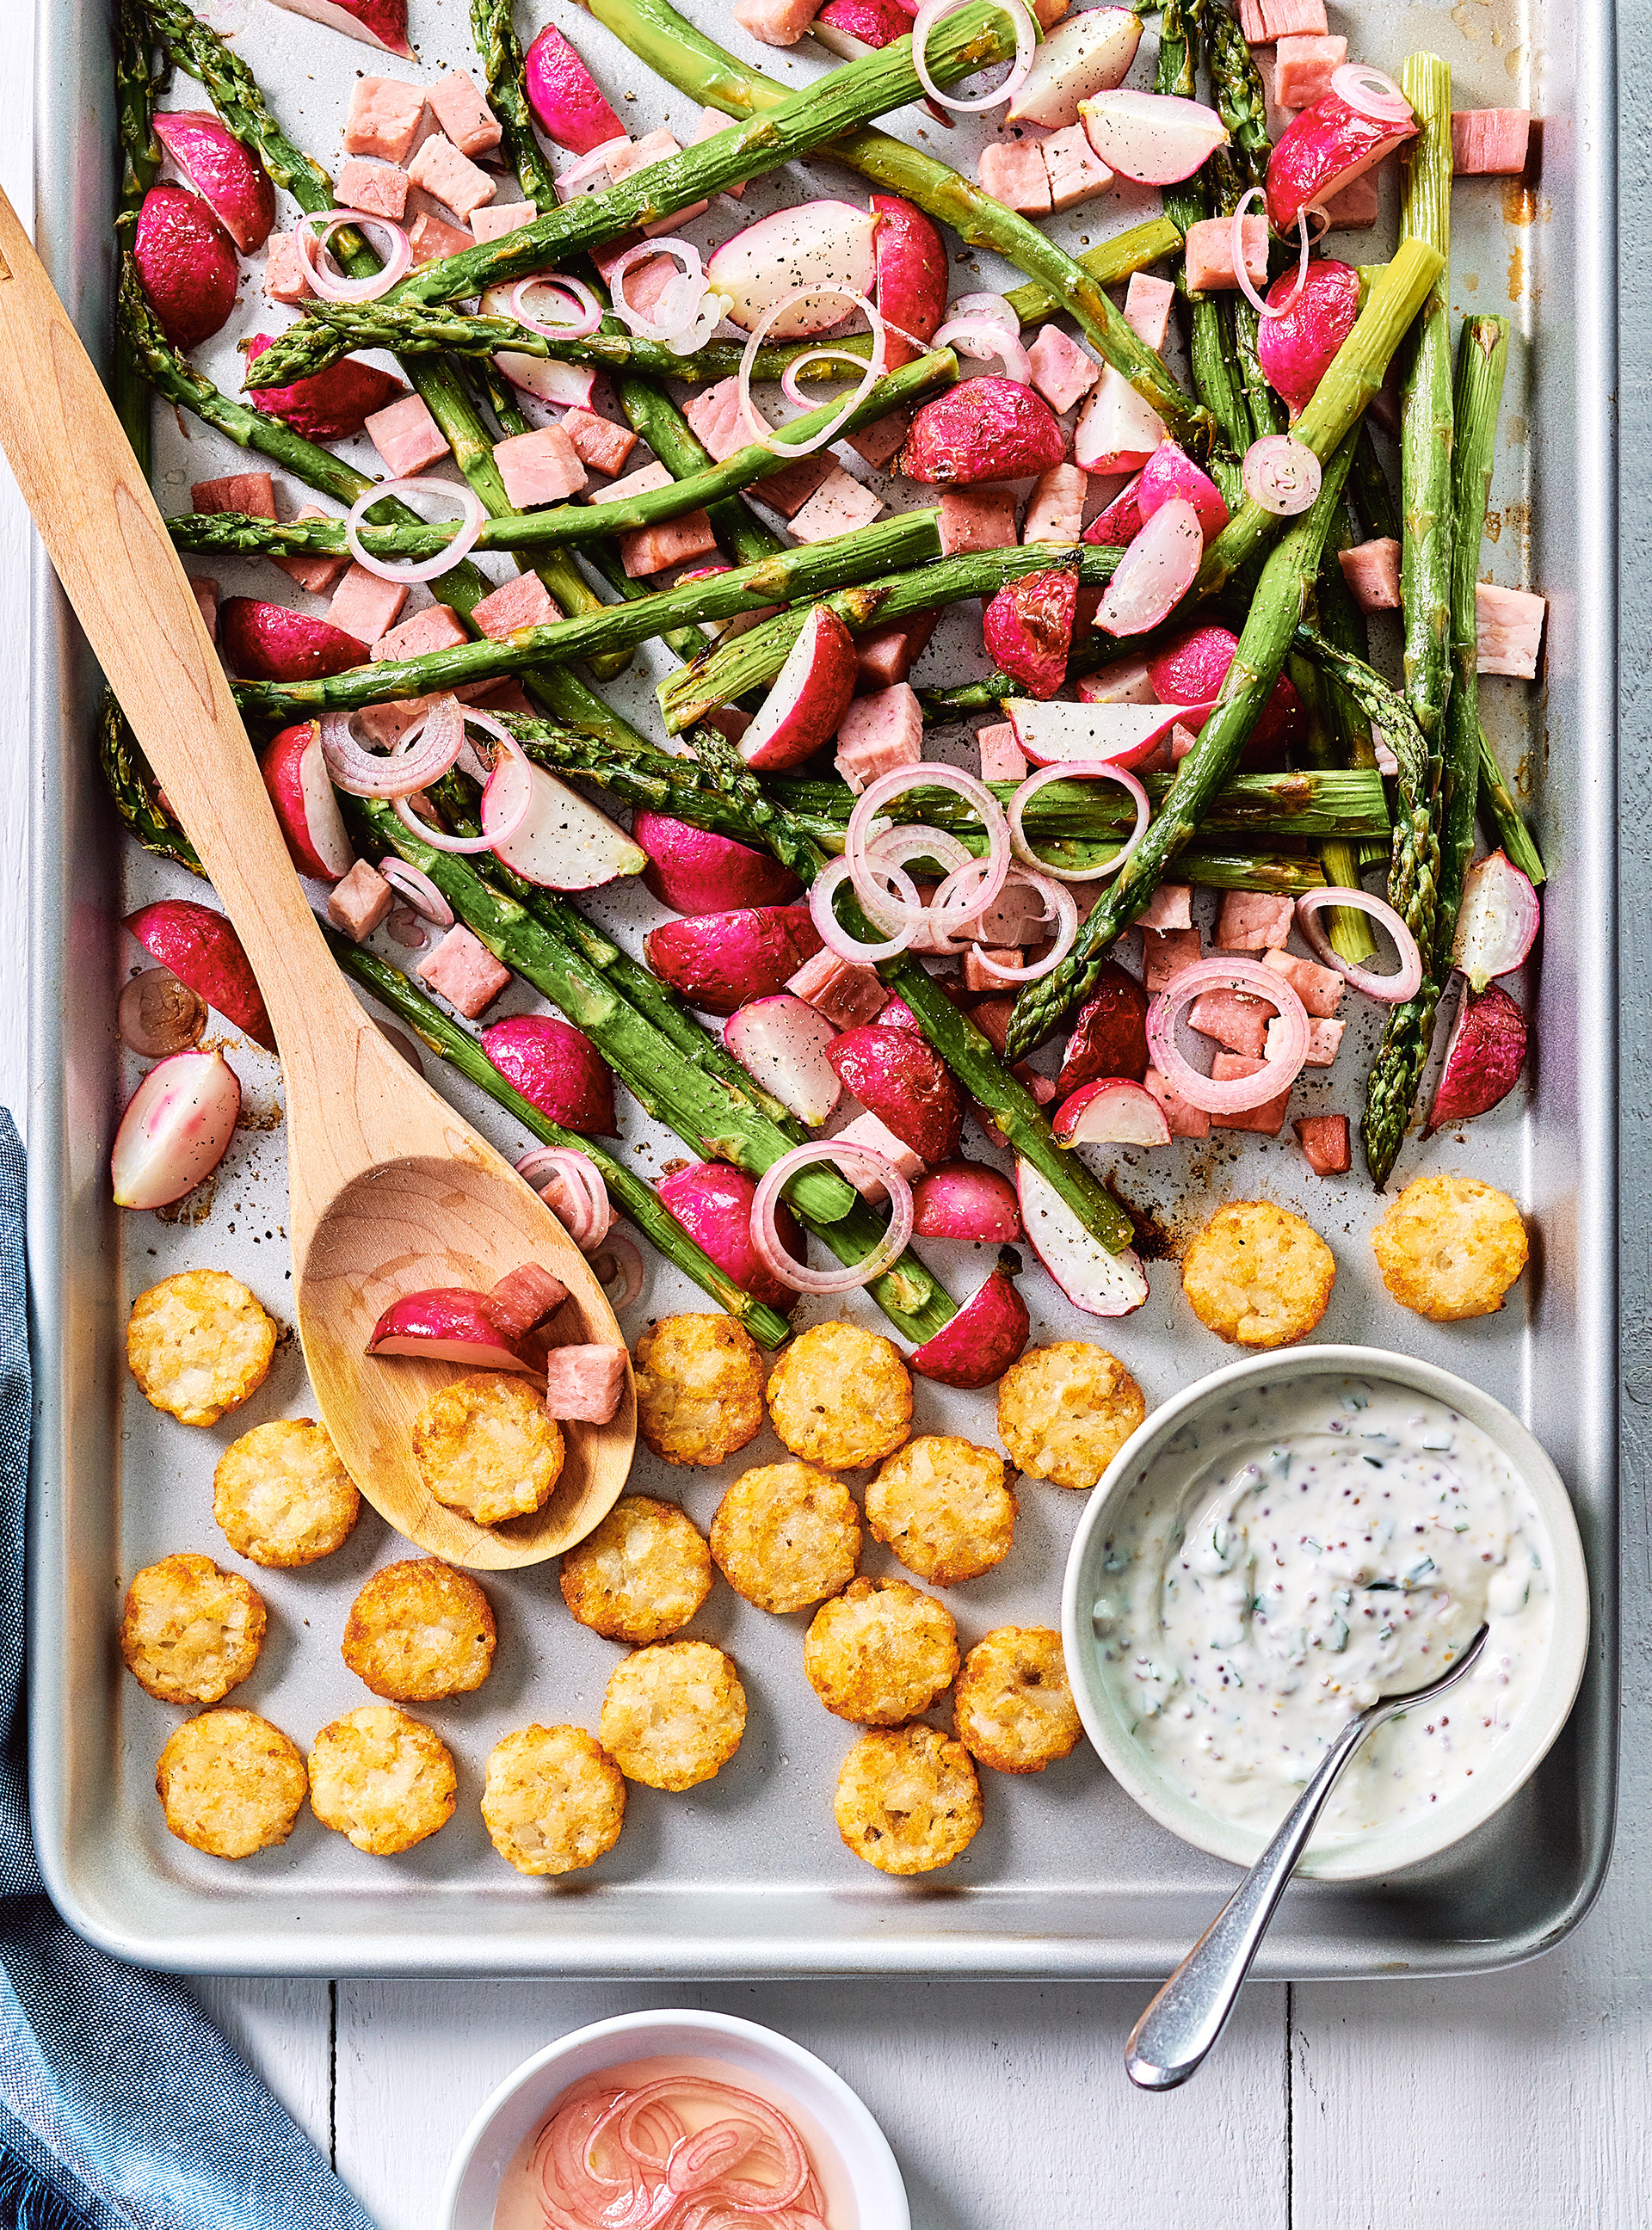 Sheet-Pan Potatoes with Vegetables and Ham